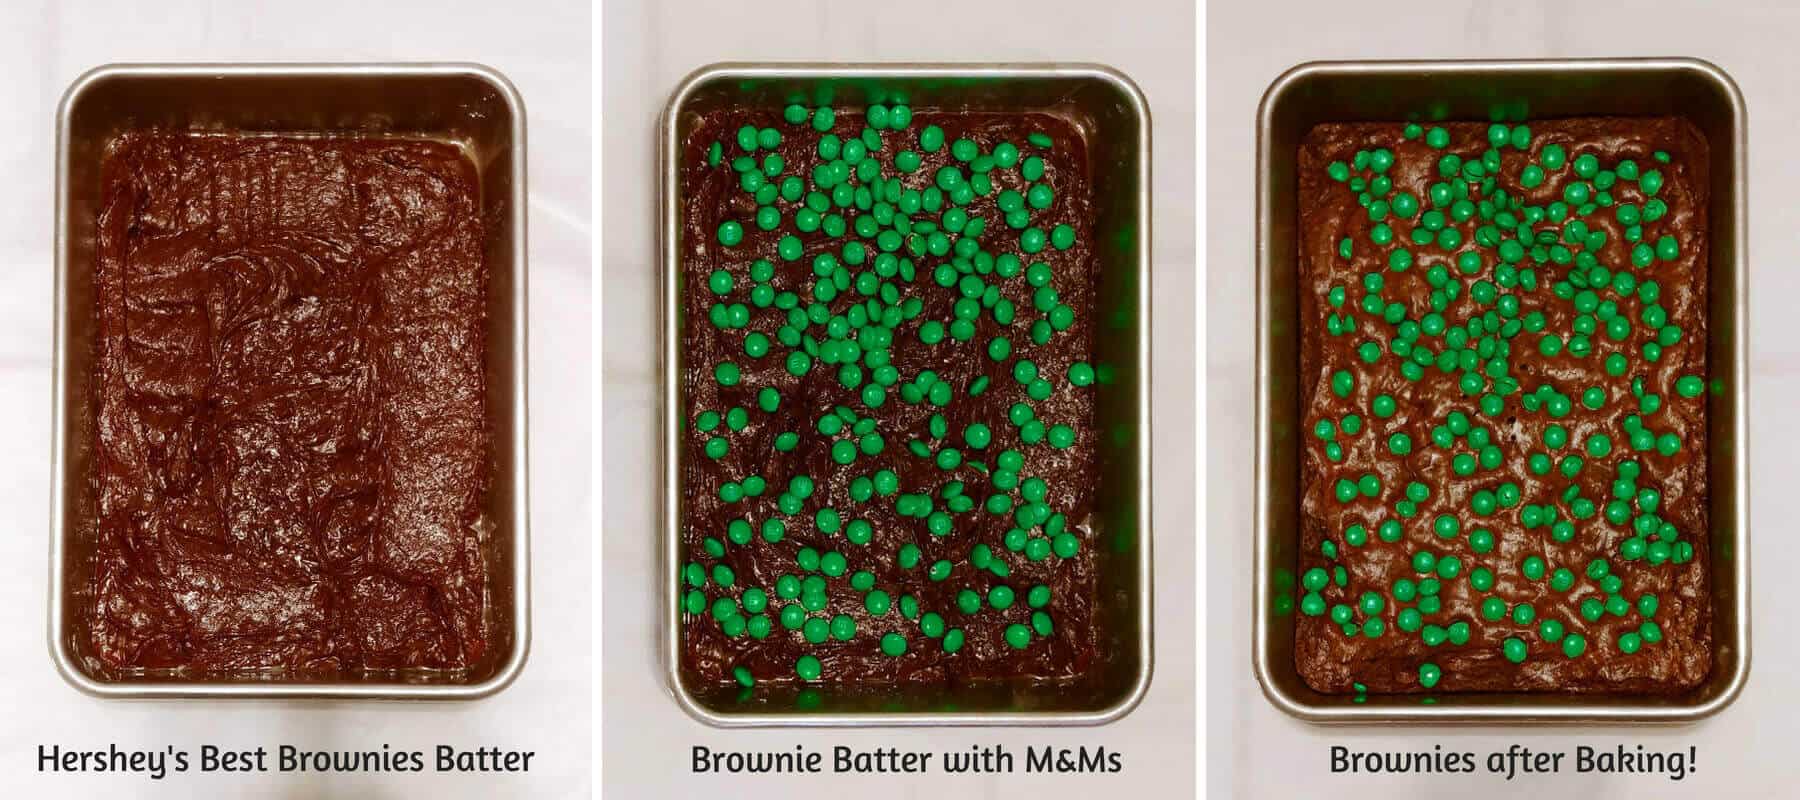 Hershey's Best Brownies - a collage with brownie batter, brownie batter topped with M&Ms, and baked brownies